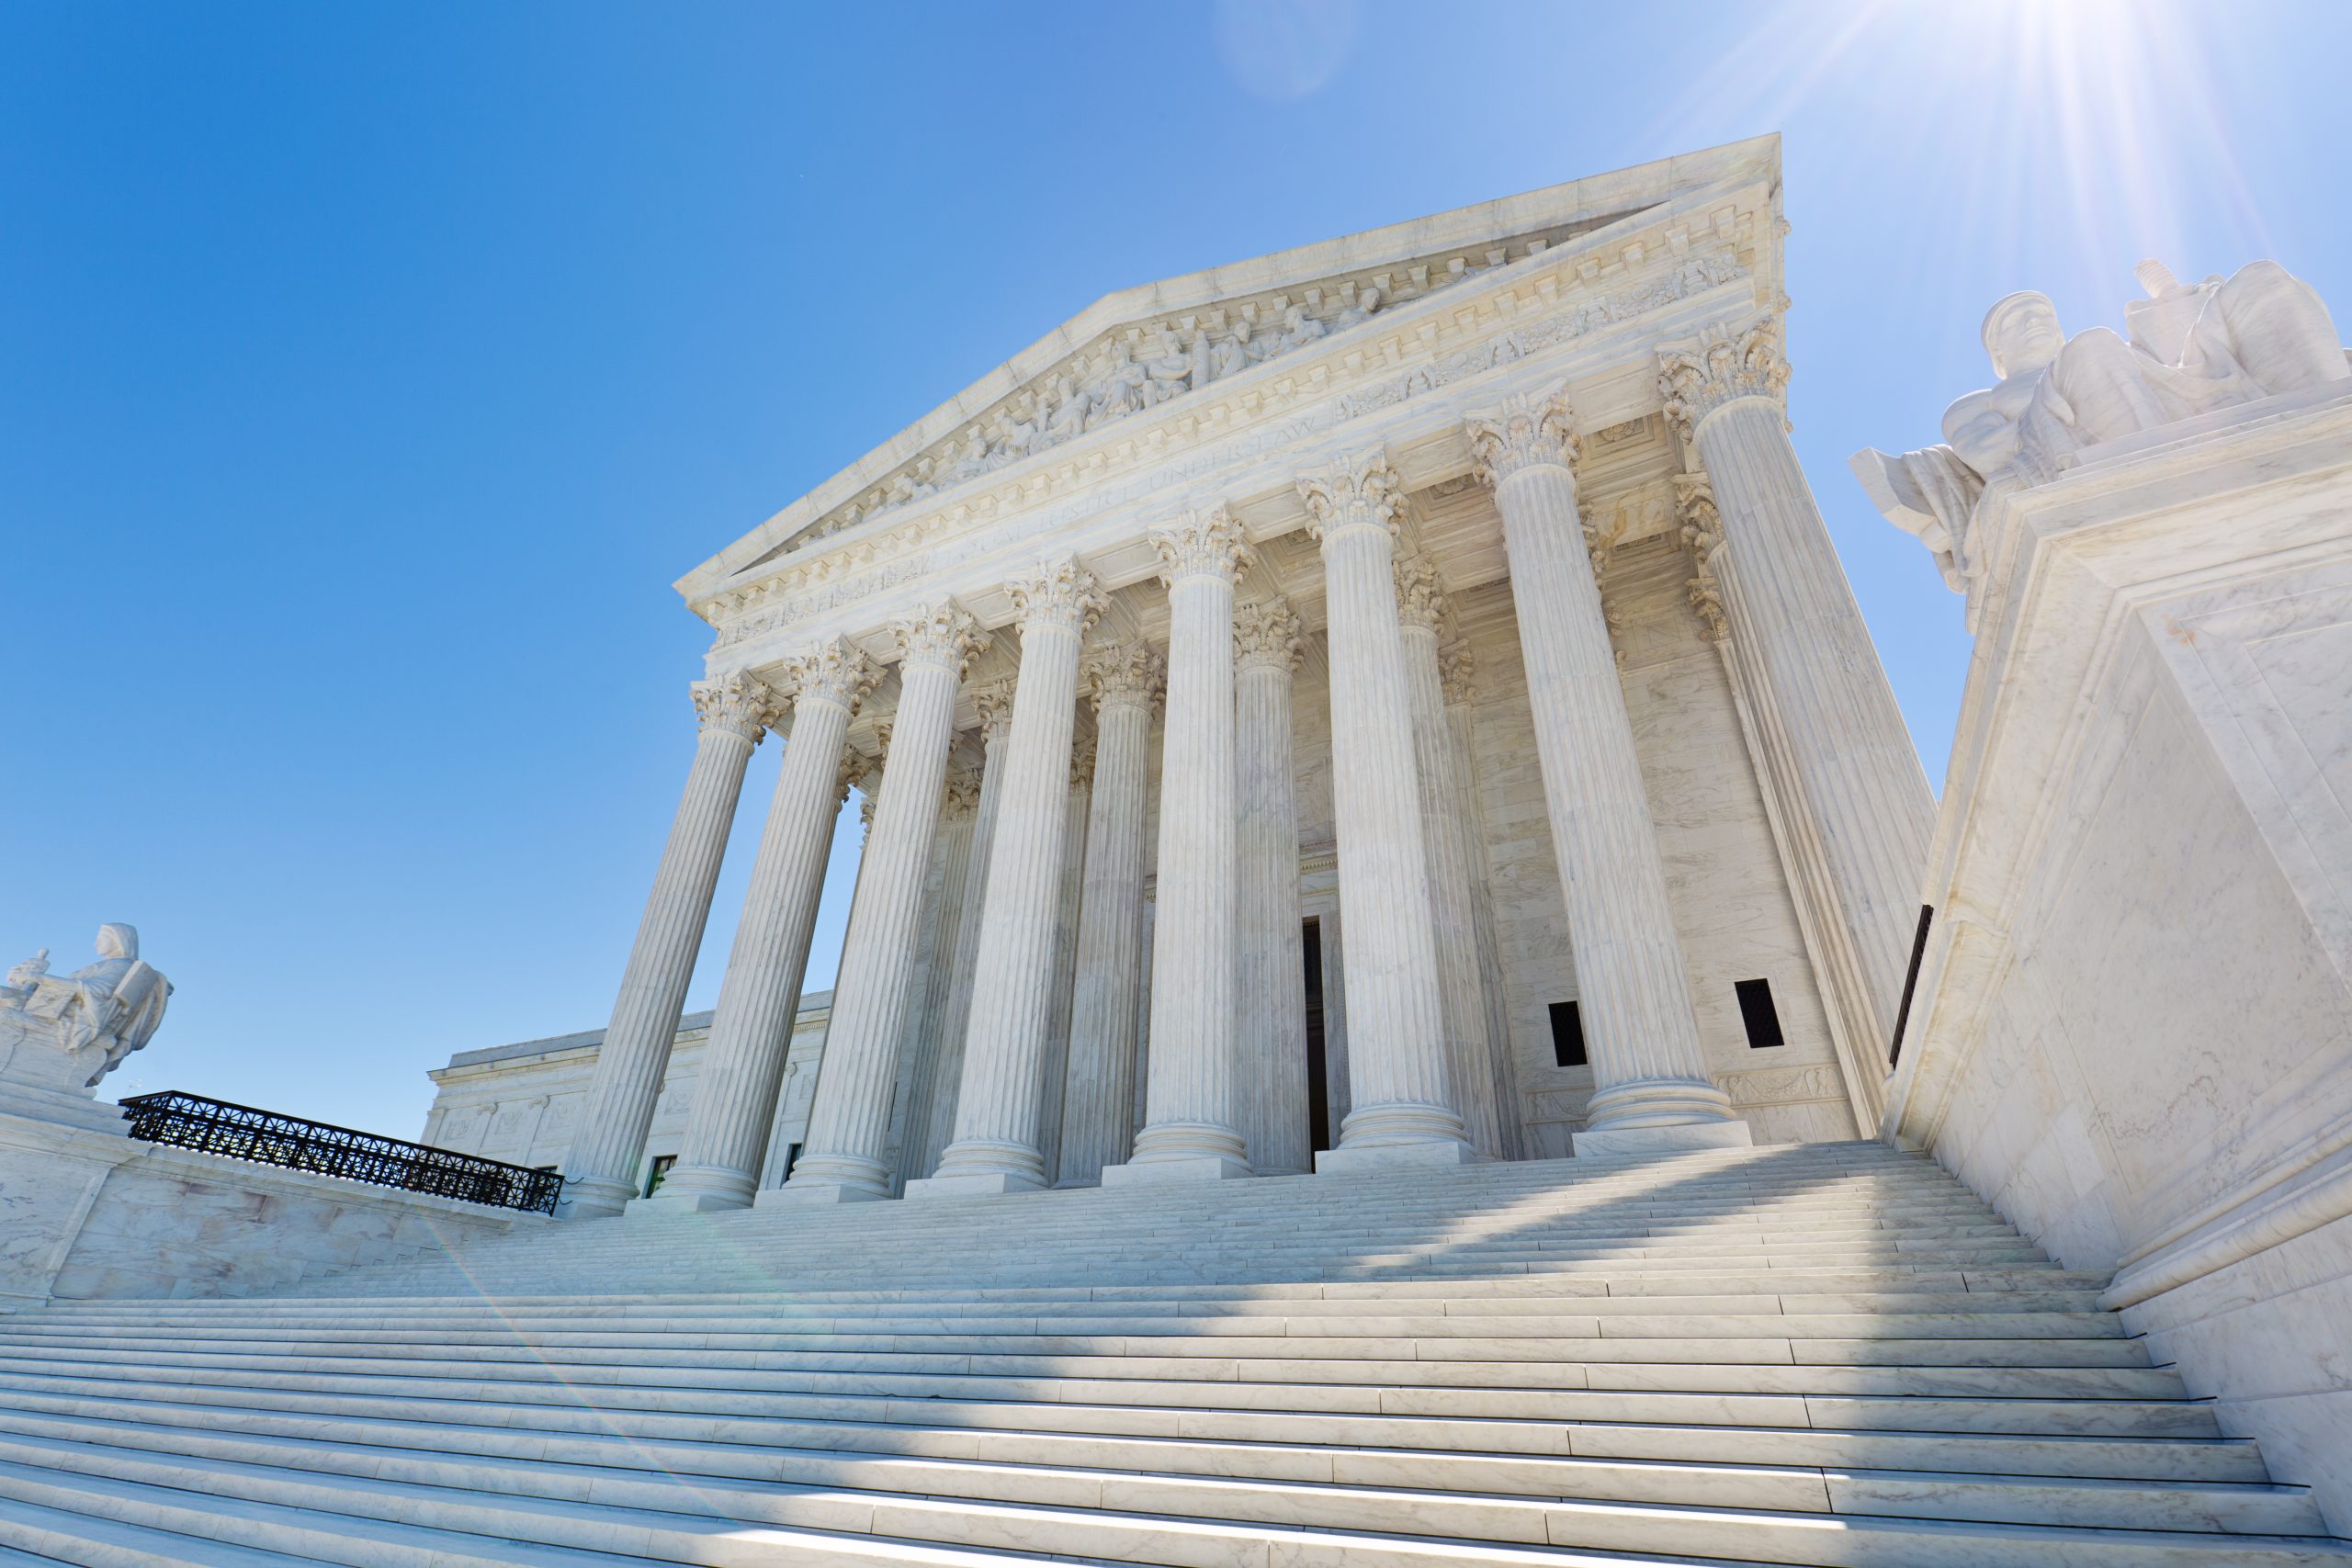 The United States Supreme Court building in Washington DC, USA.